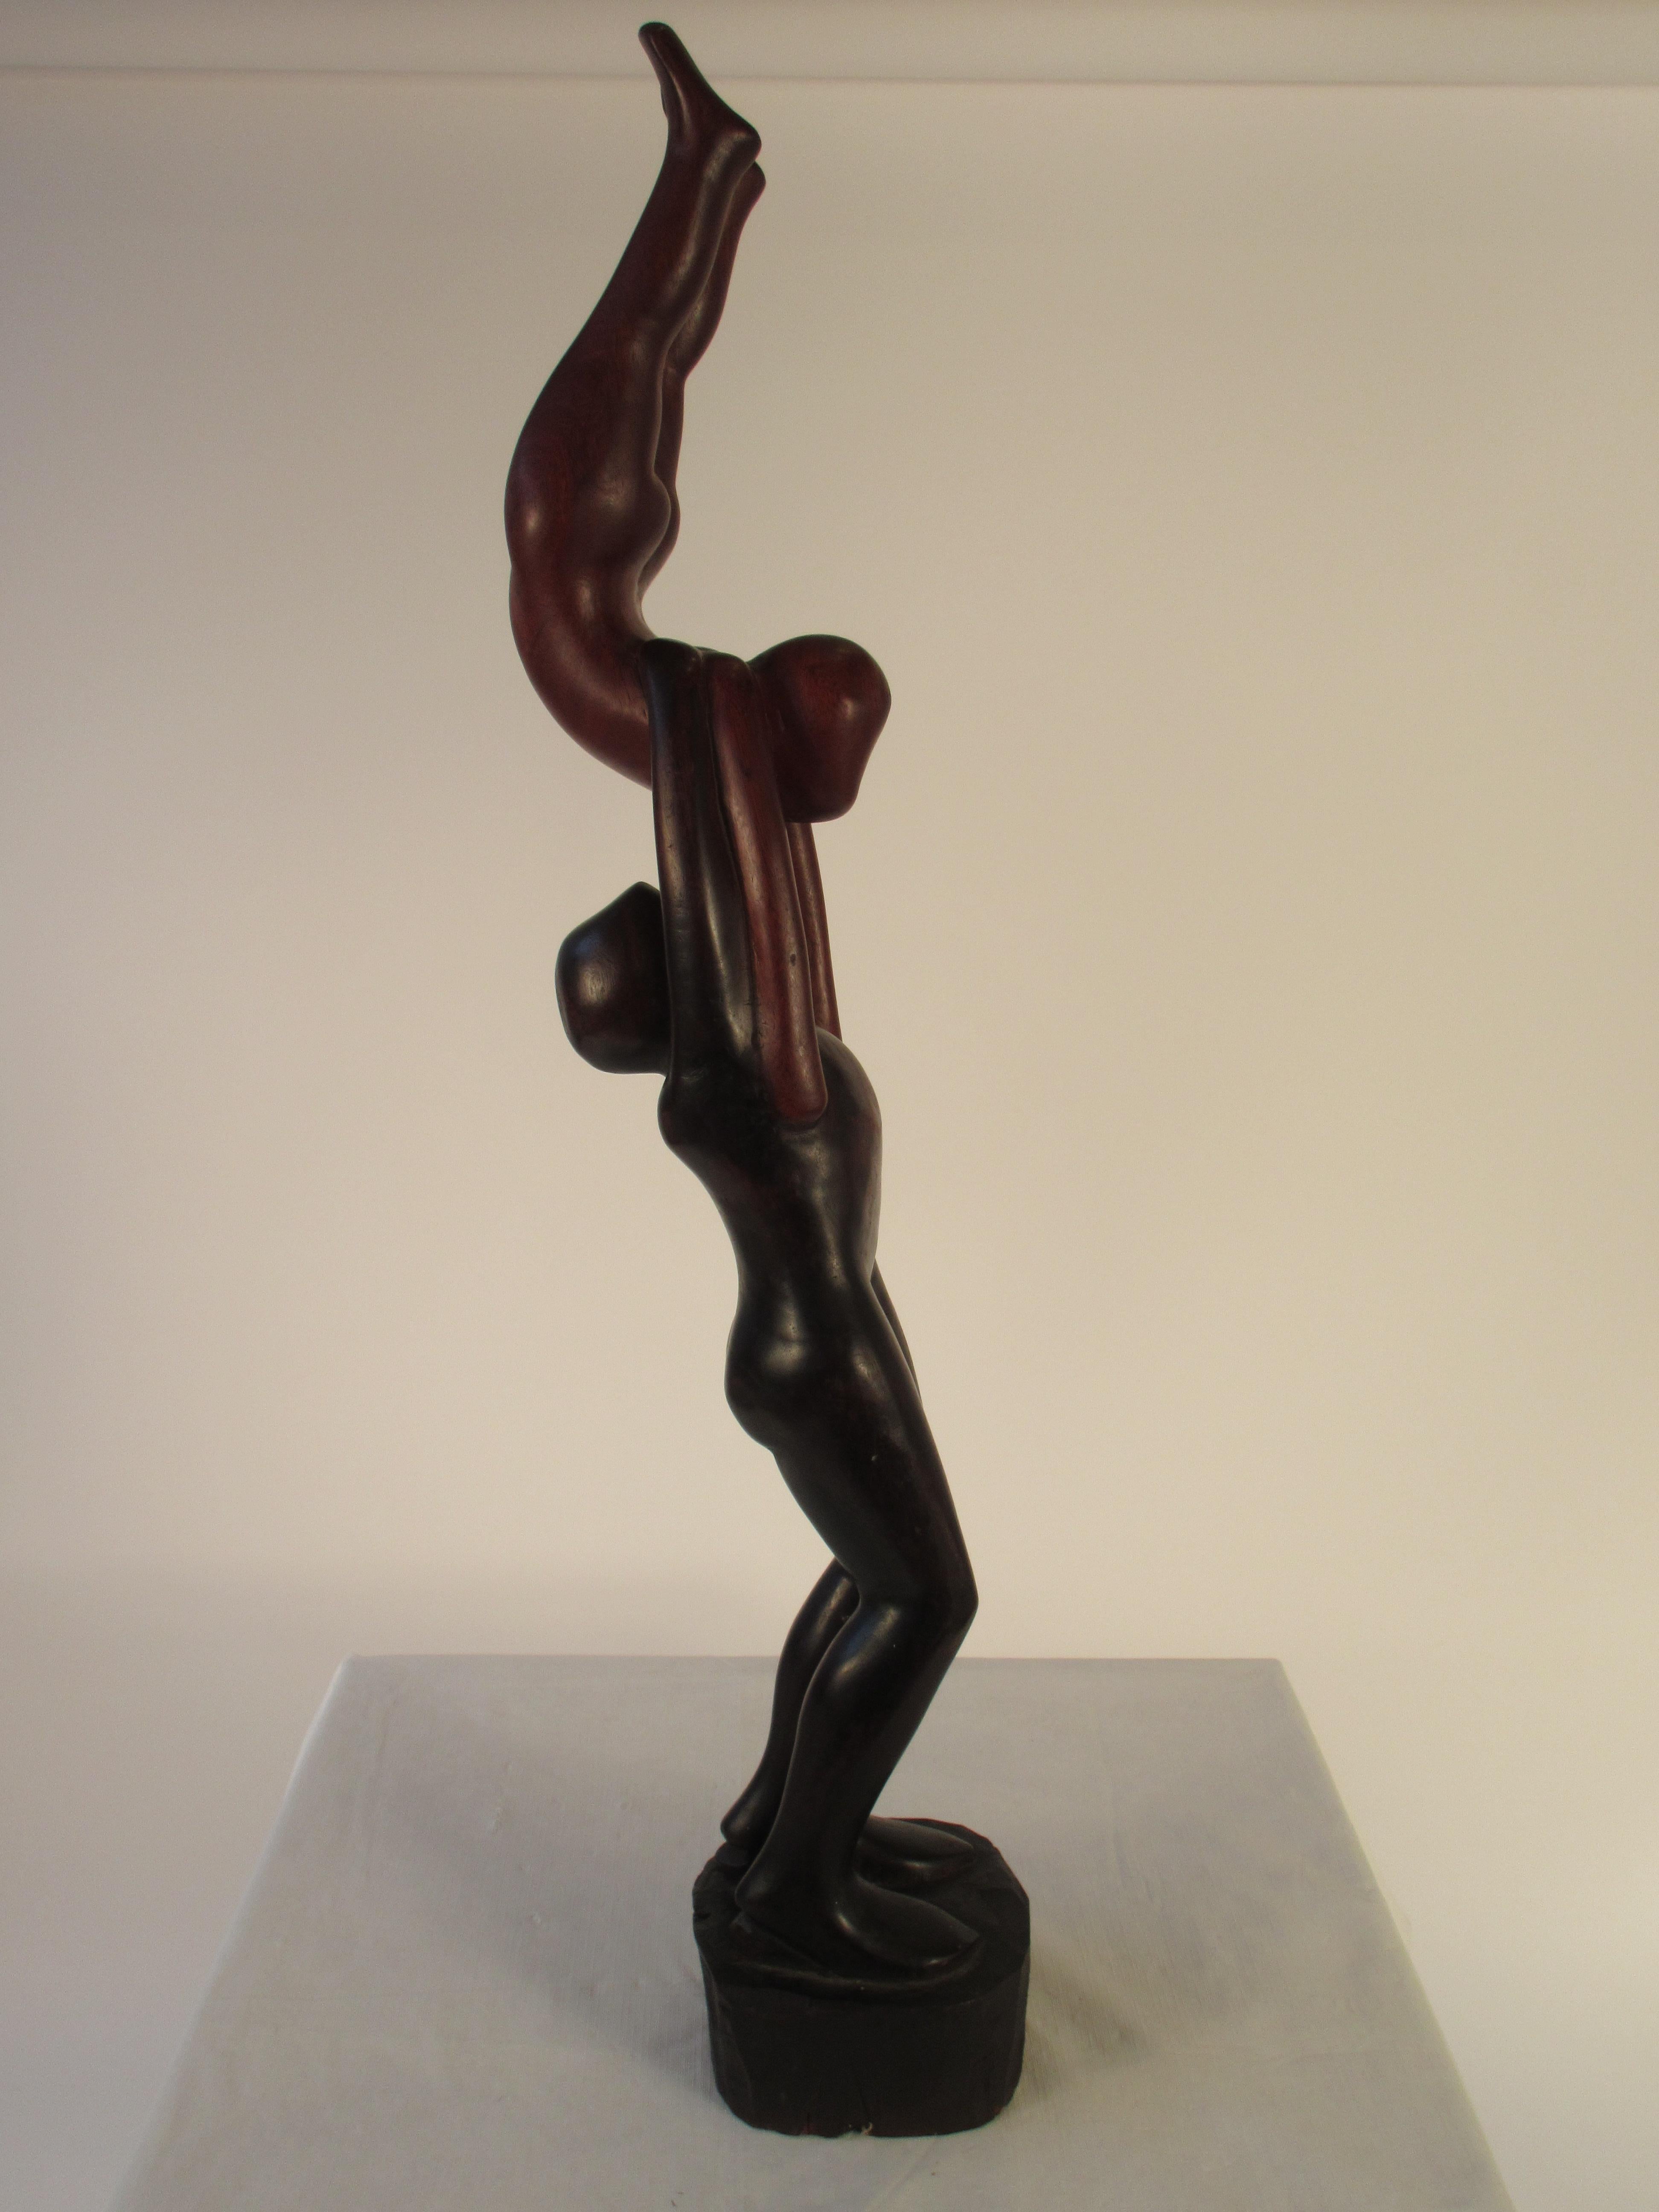 woman and man sculpture